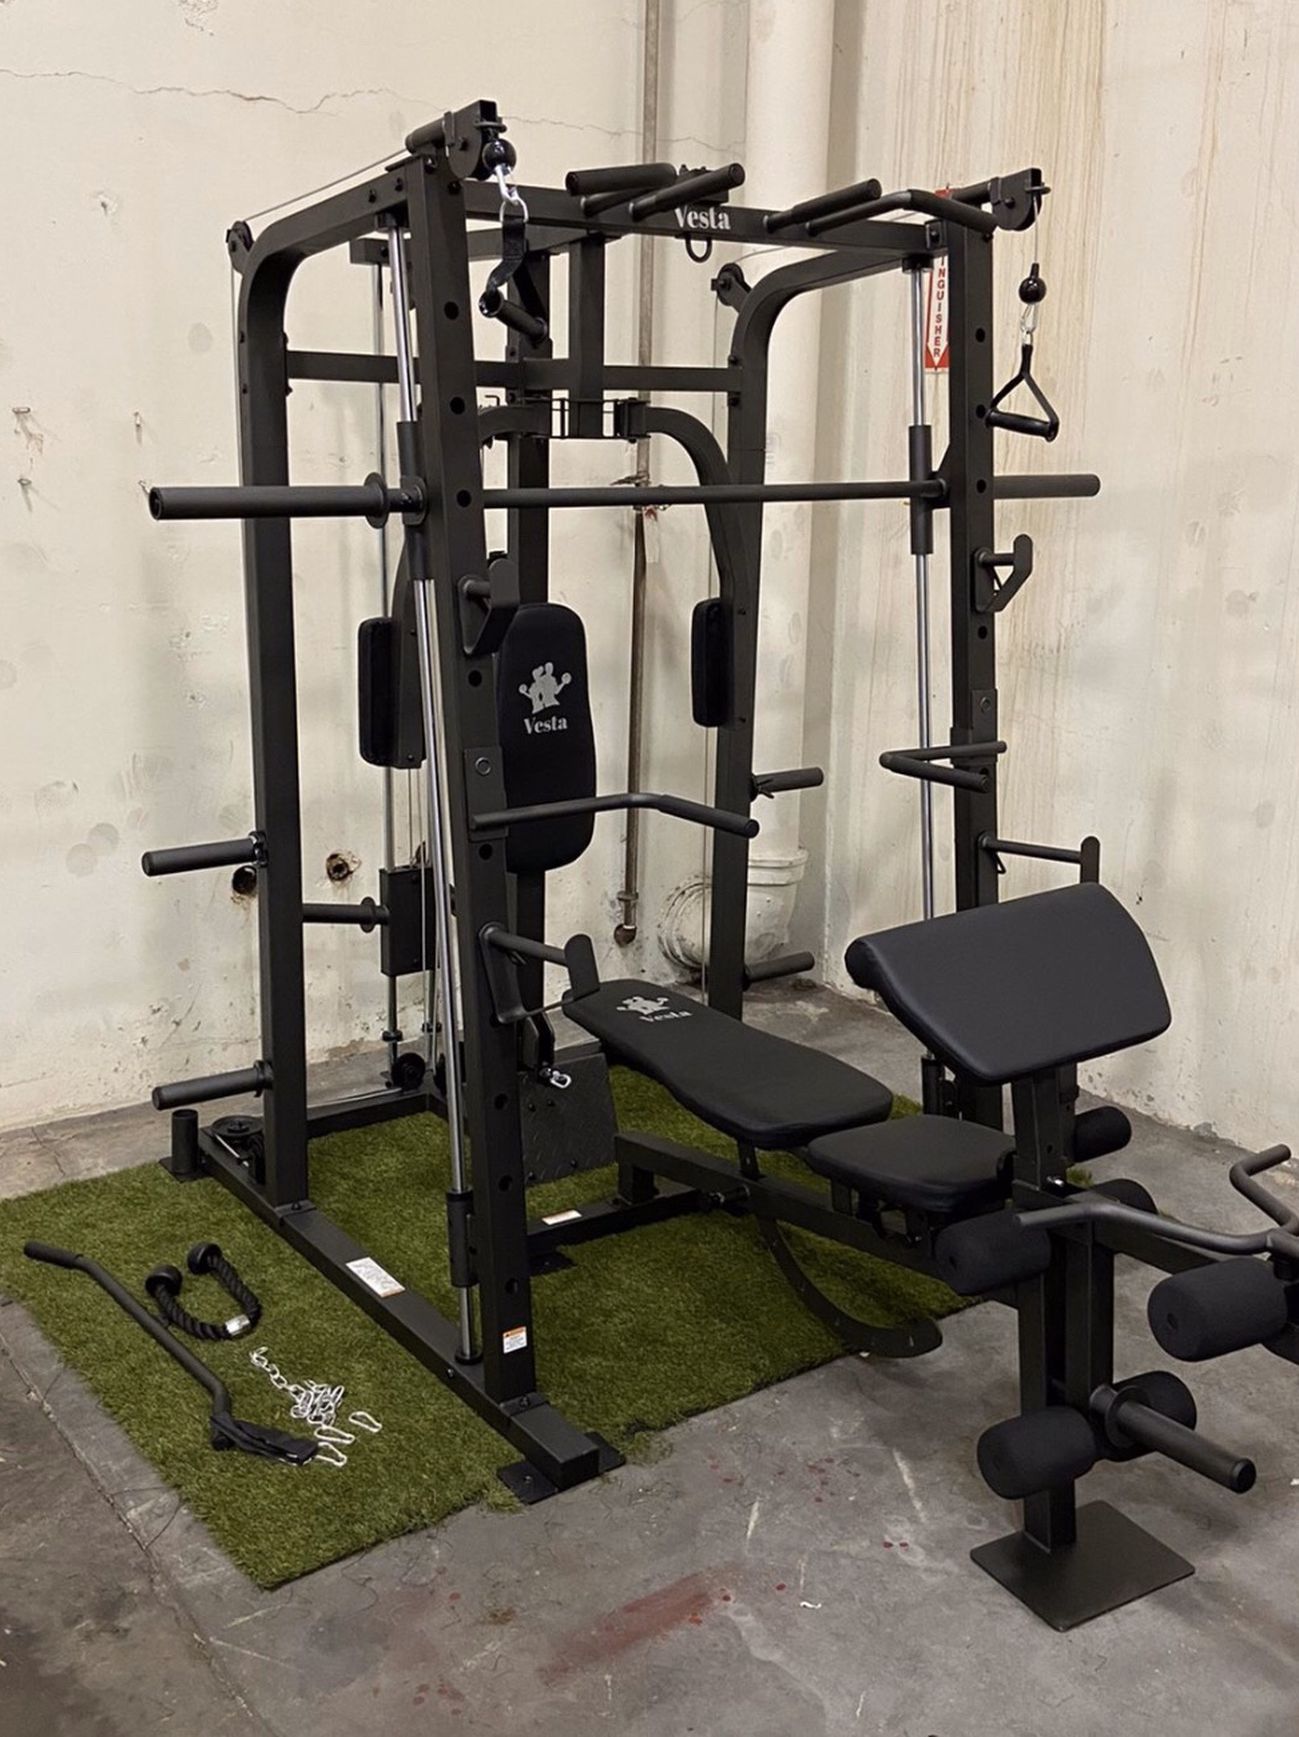 BRAND NEW SMITH MACHINE BUNDLE - Smith machine + Olympic bar + Adjustable Bench - Check Out My Other Posts For More Gym Equipment 